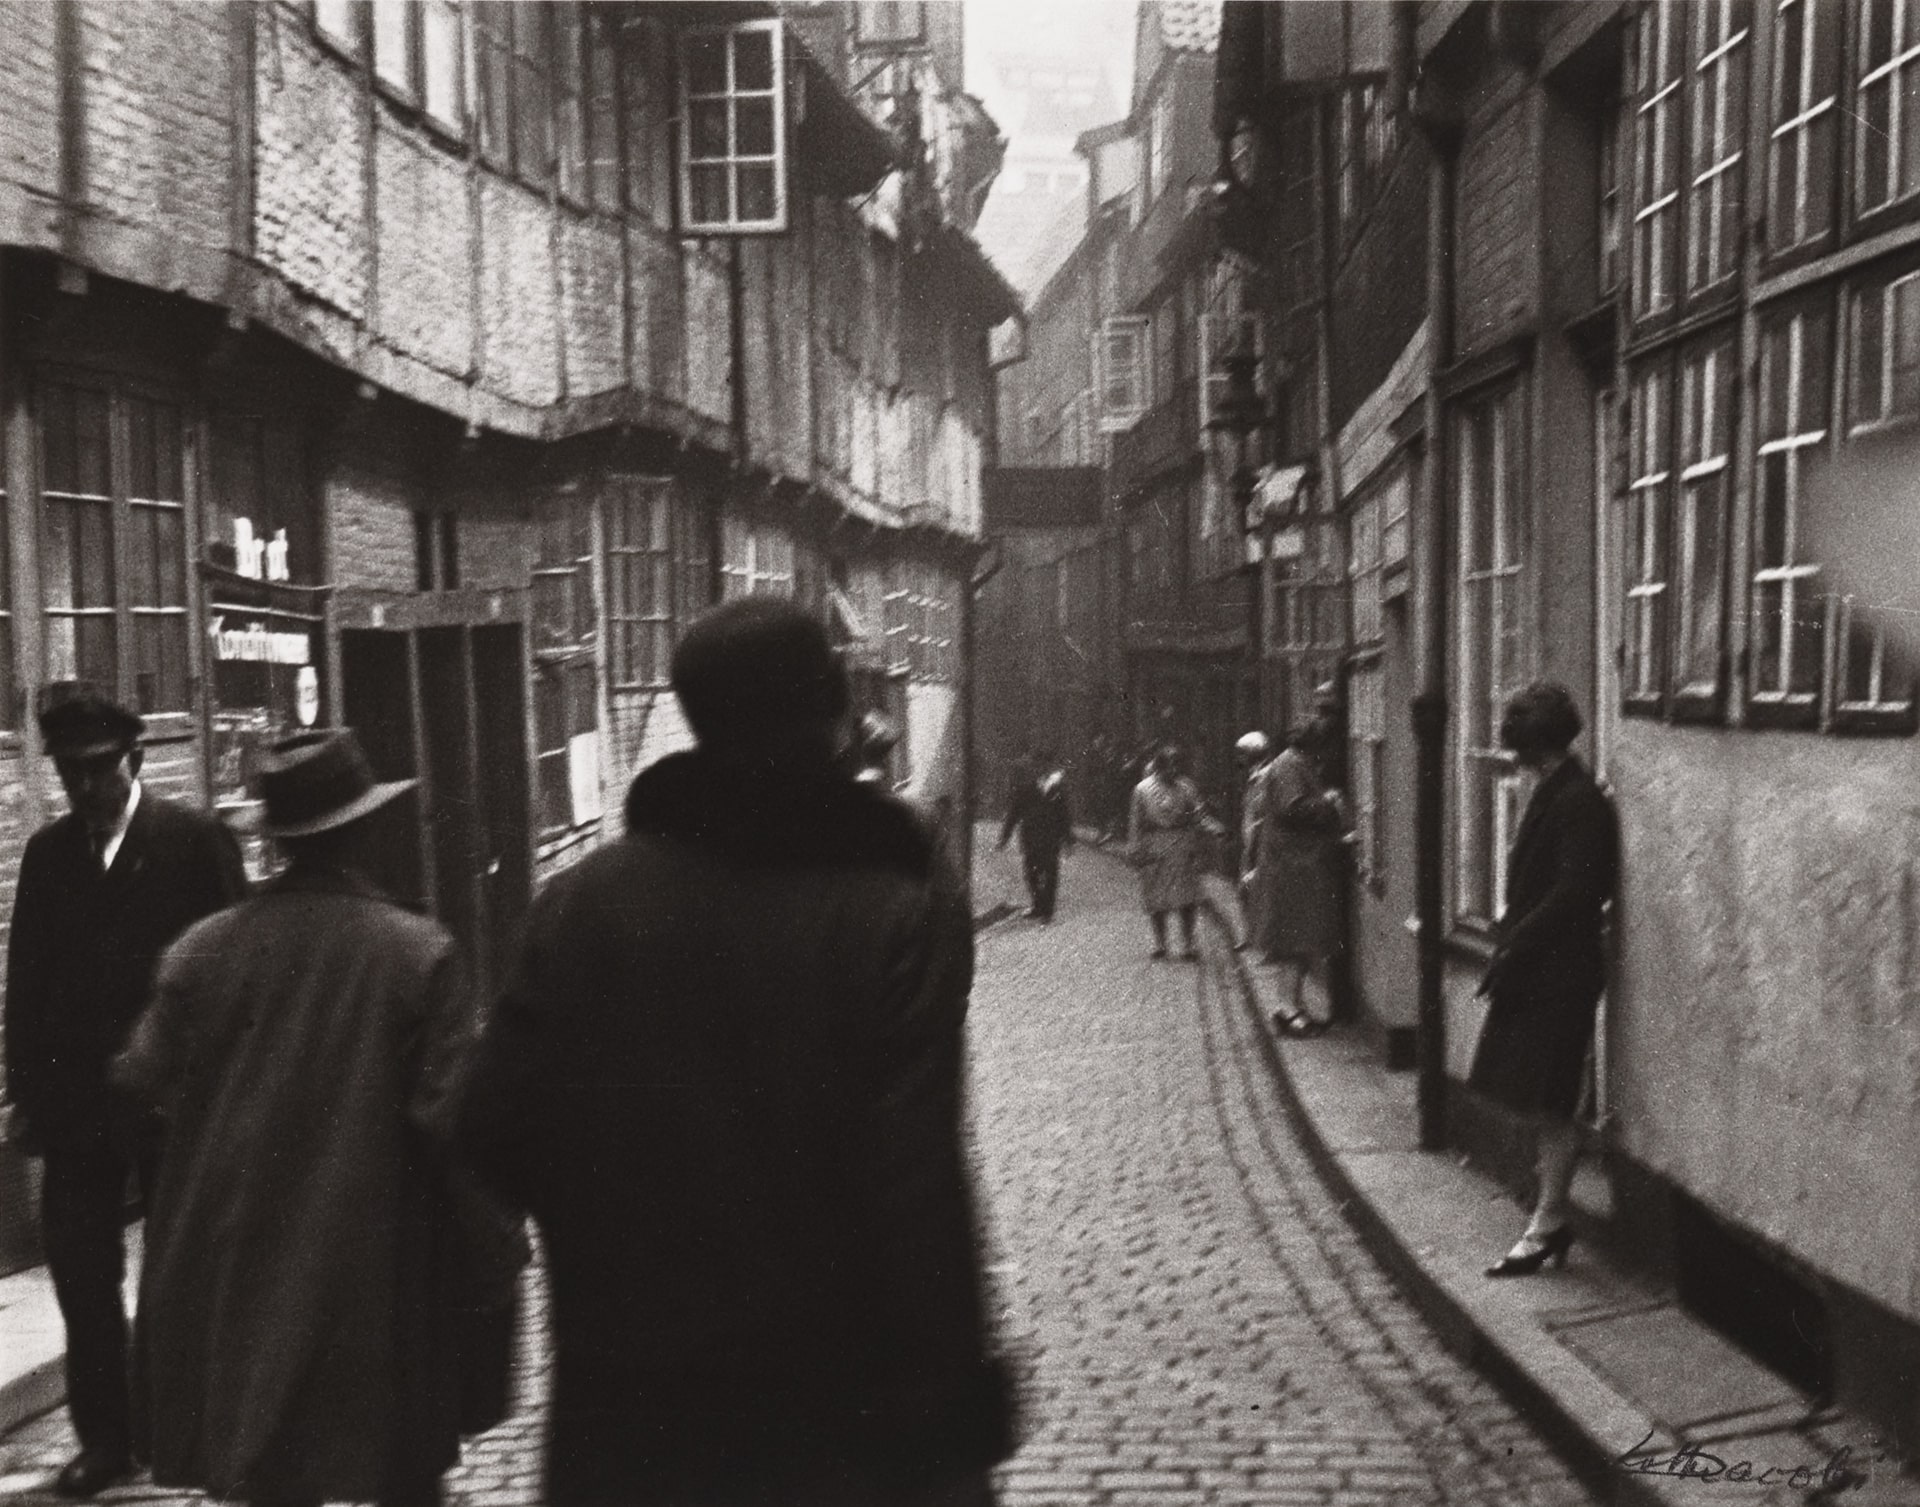 a black and white photograph of a street scene